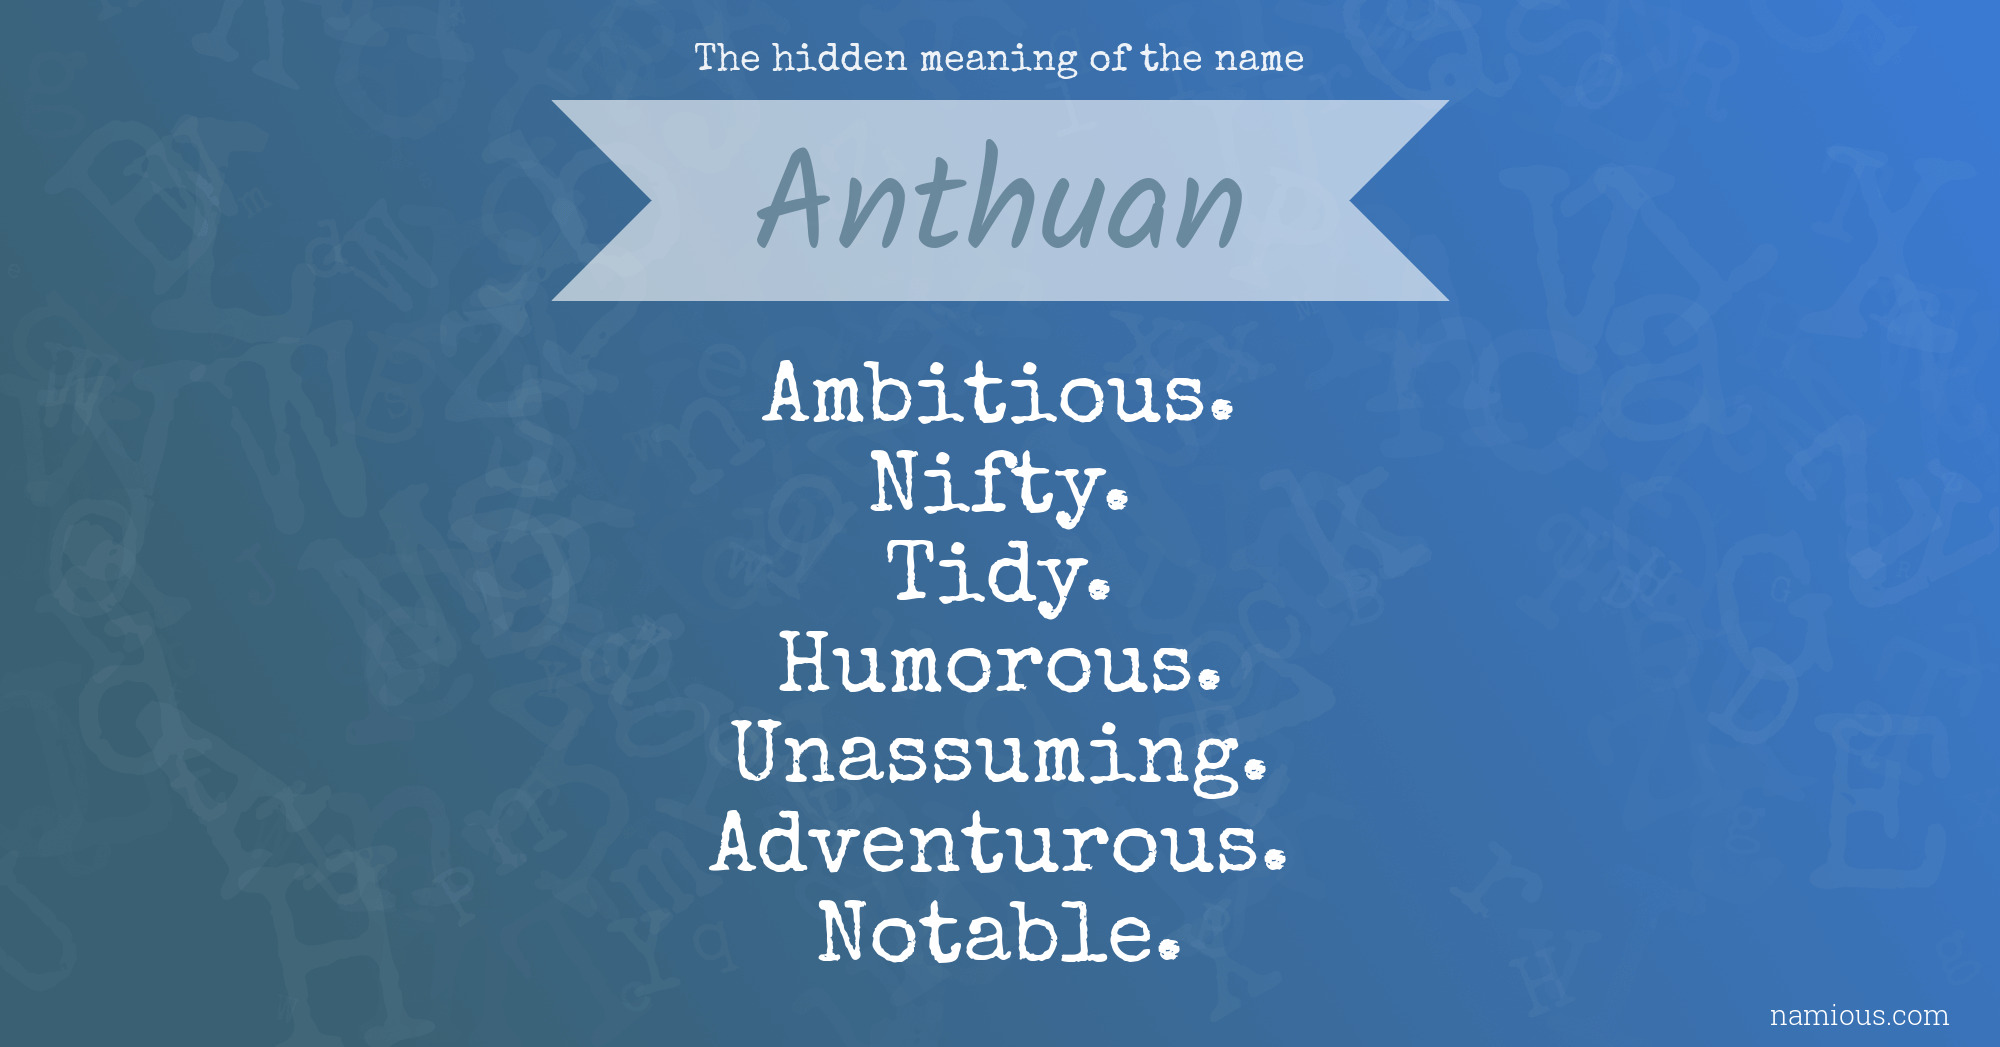 The hidden meaning of the name Anthuan